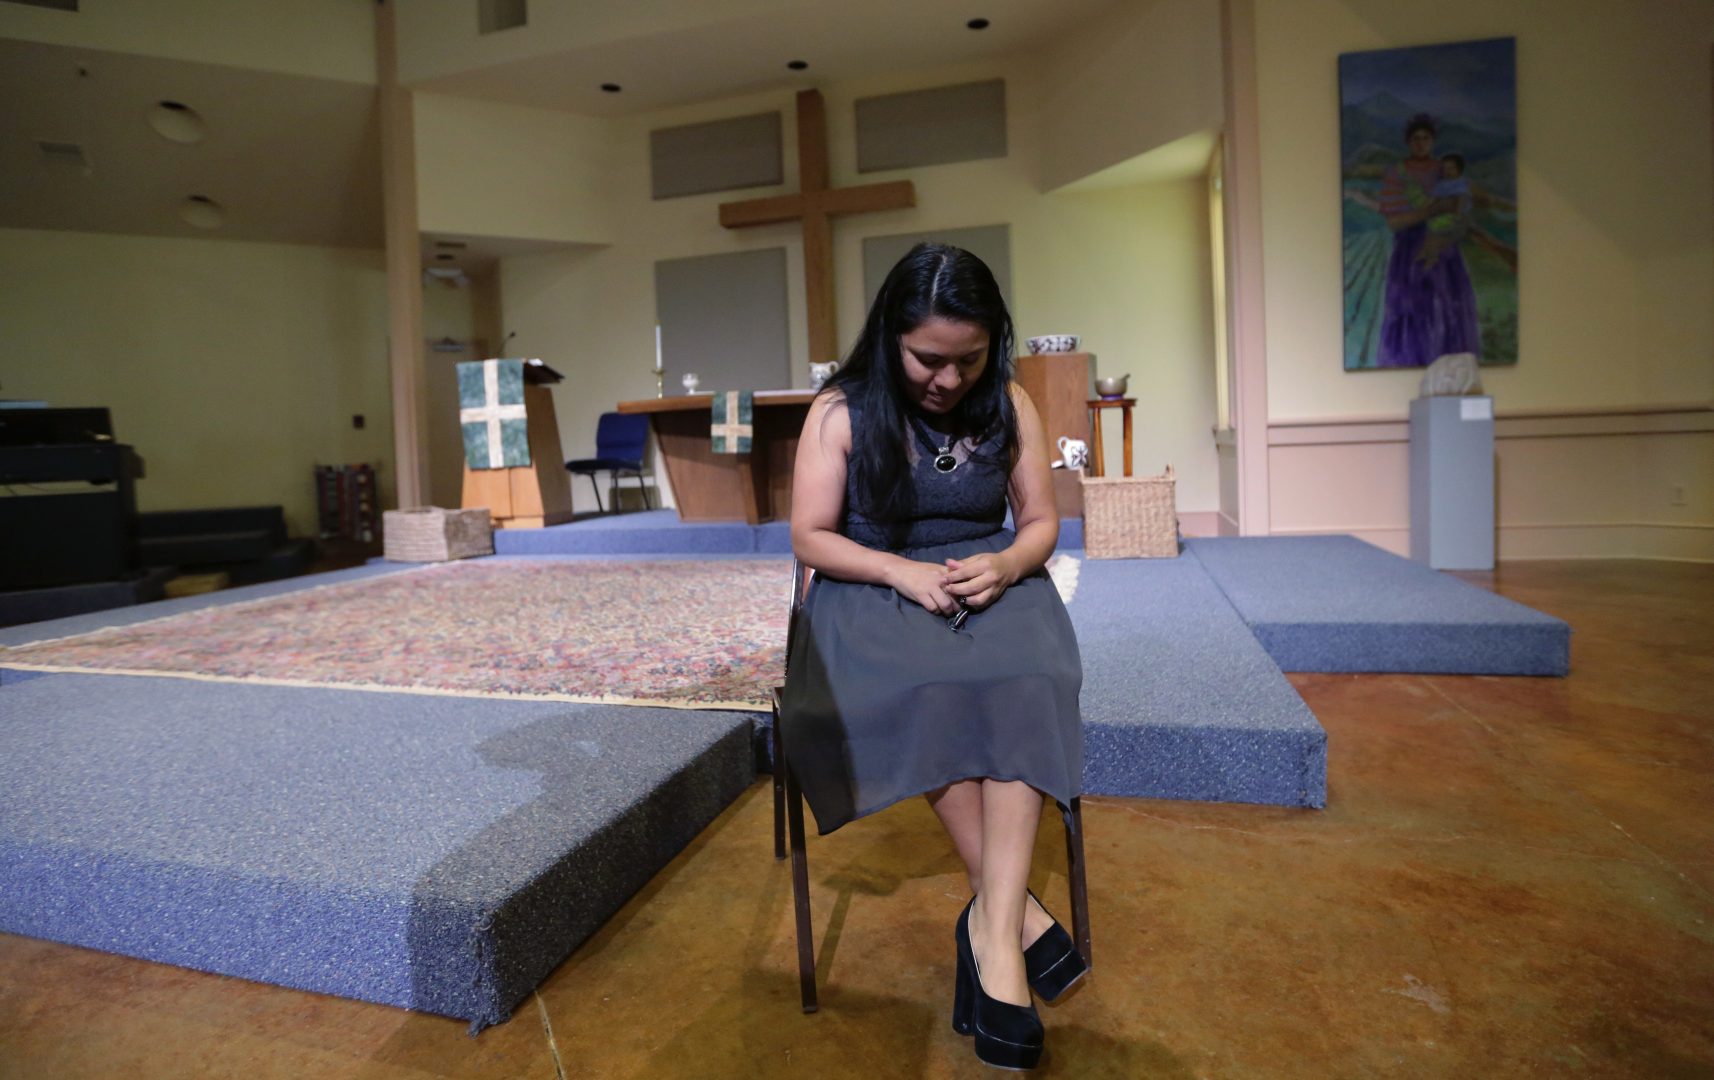 FILE PHOTO: In this Wednesday, Feb. 22, 2017 photo, Hilda Ramirez, an immigrant living illegally in the U.S, sits in the sanctuary at St. Andrew's Presbyterian Church as she waits to talk to a reporter, Wednesday, in Austin, Texas. Ramirez, from Guatemala, and her son have taken refuge at the church.